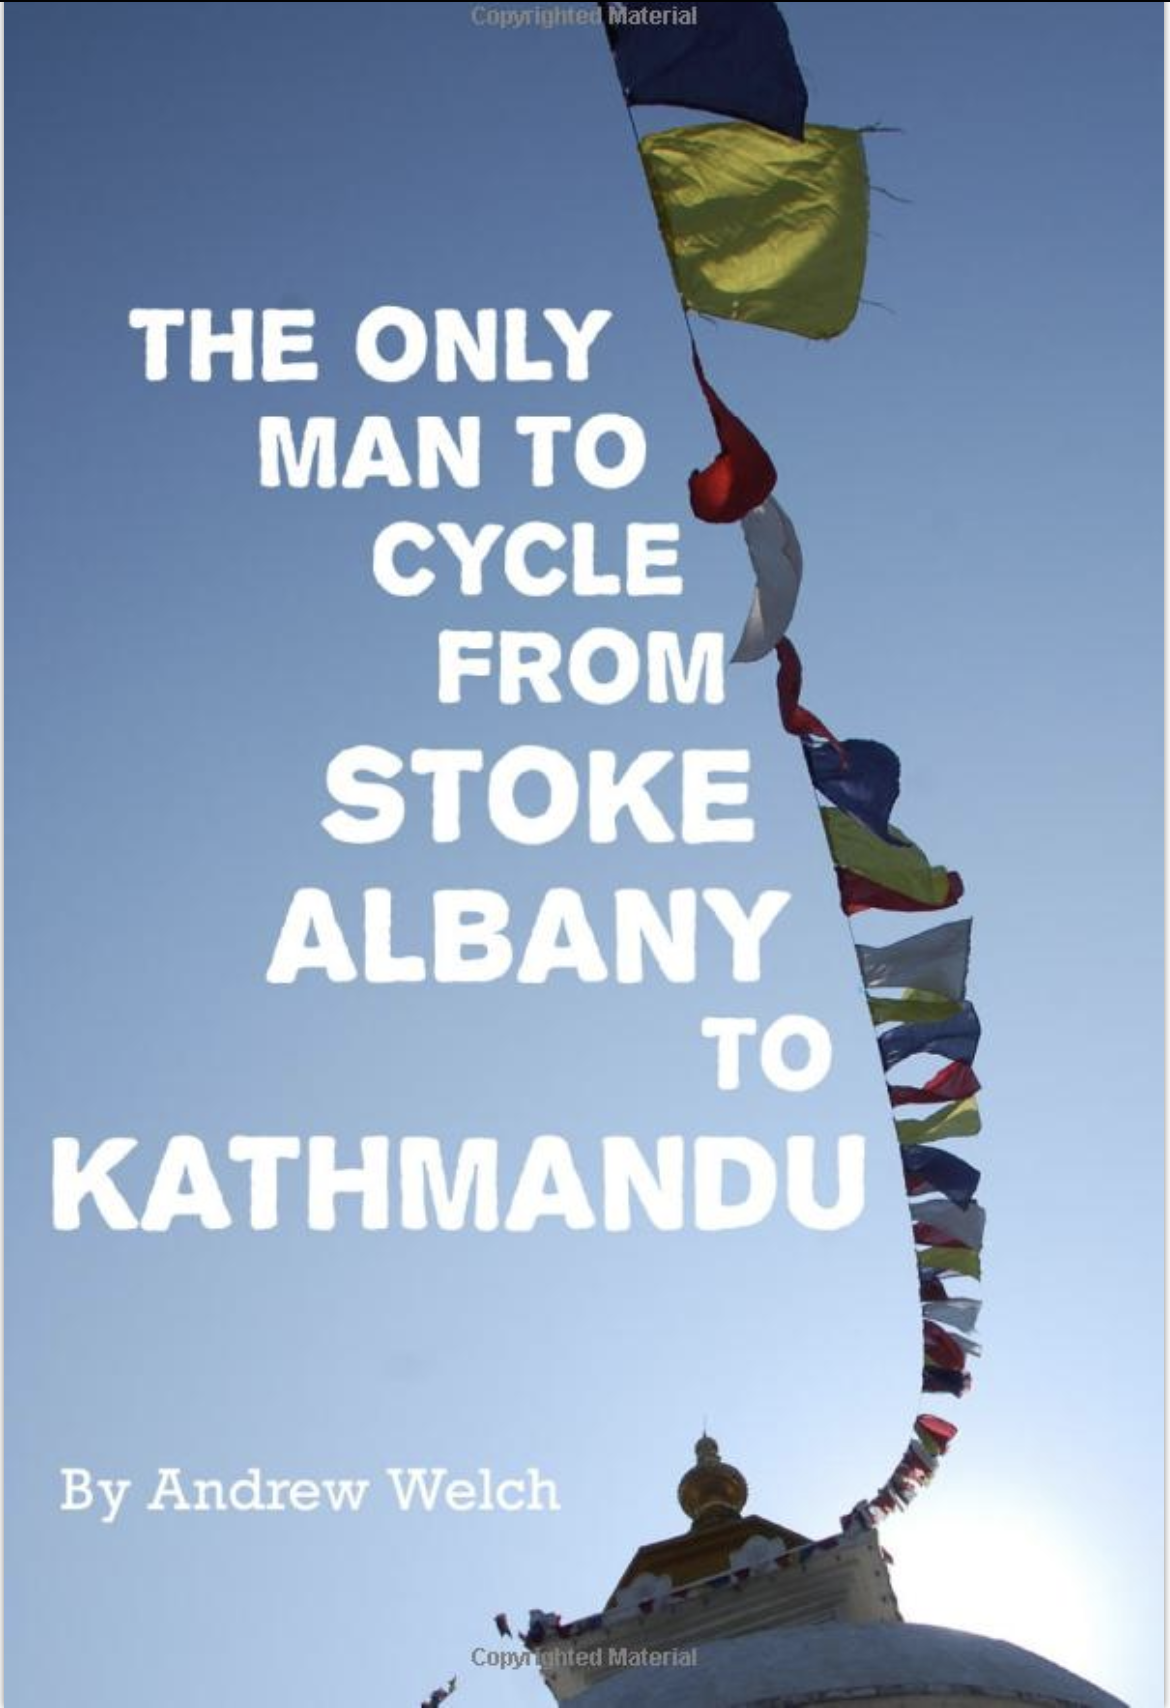 The Only Man to Cycle from Stoke Albany to Kathmandu Thumbnail